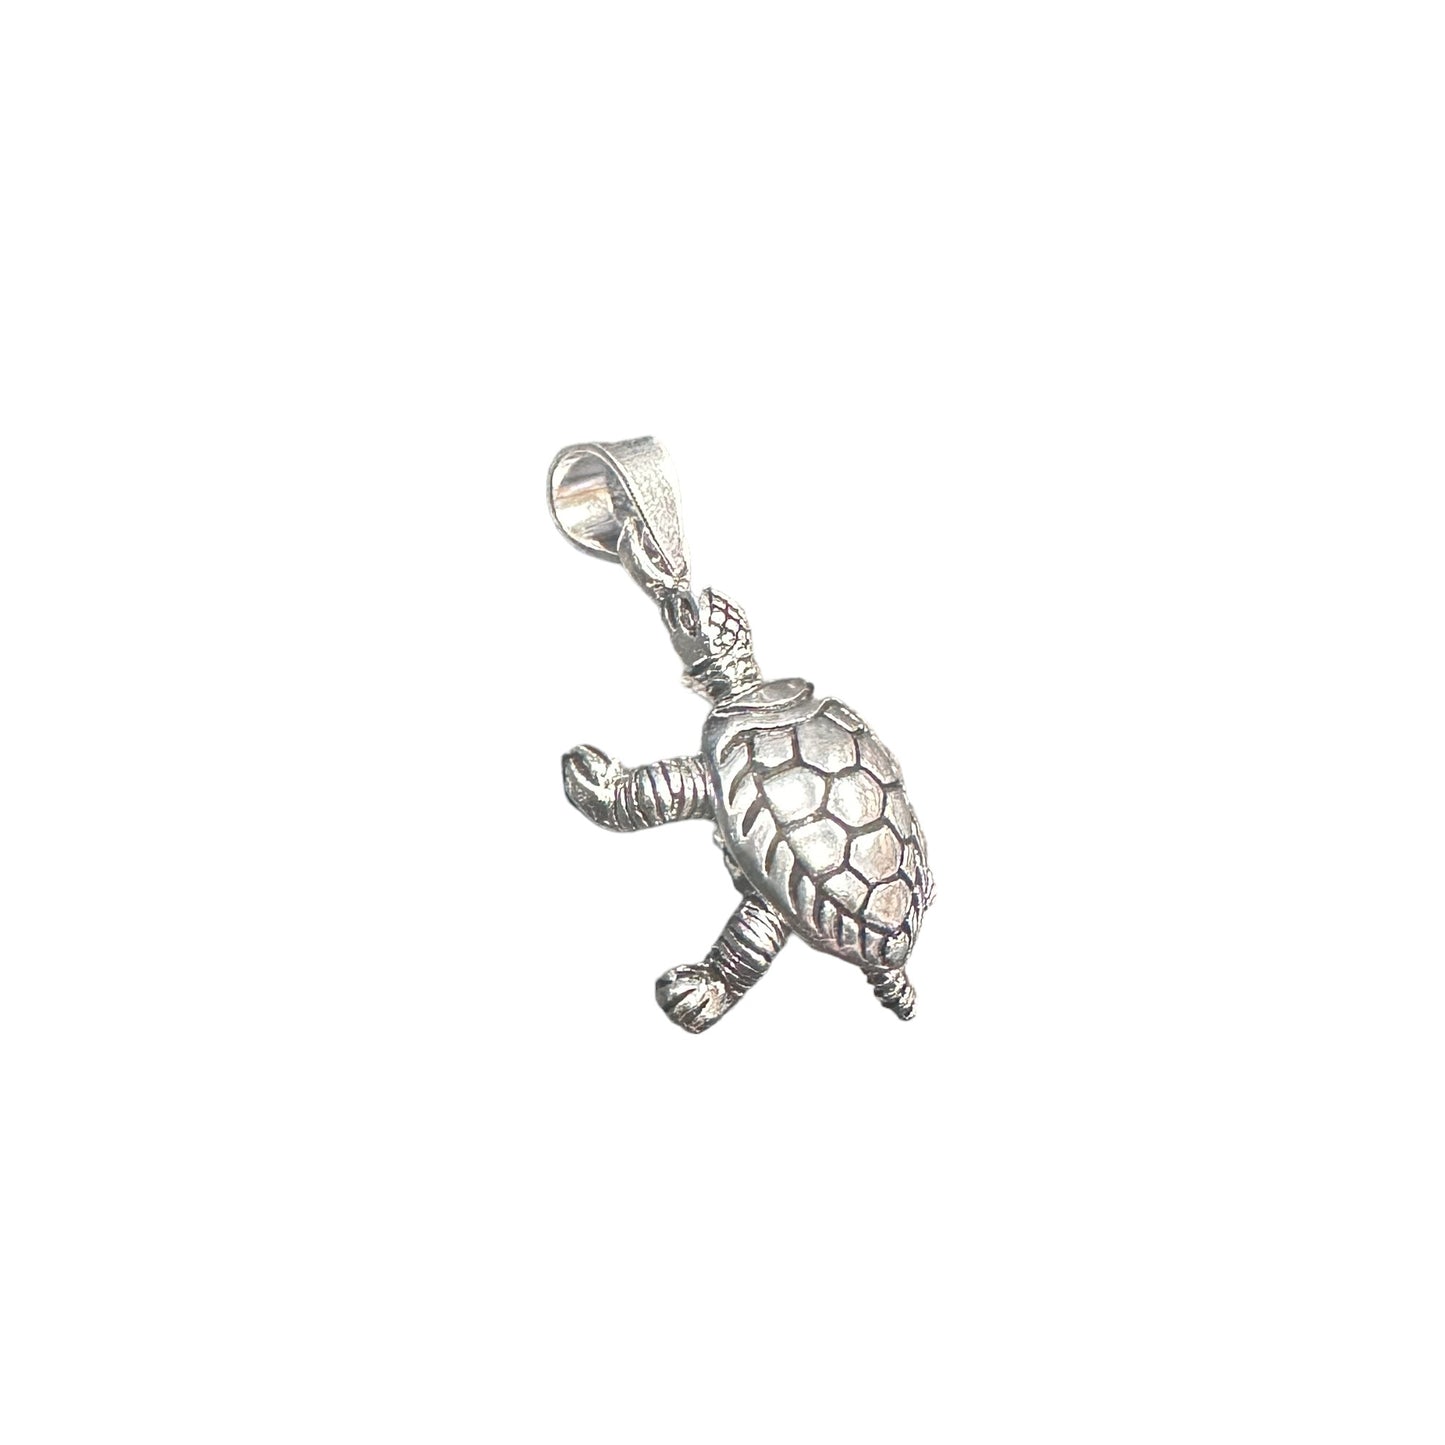 Turtle Charm Pendant Sterling Silver